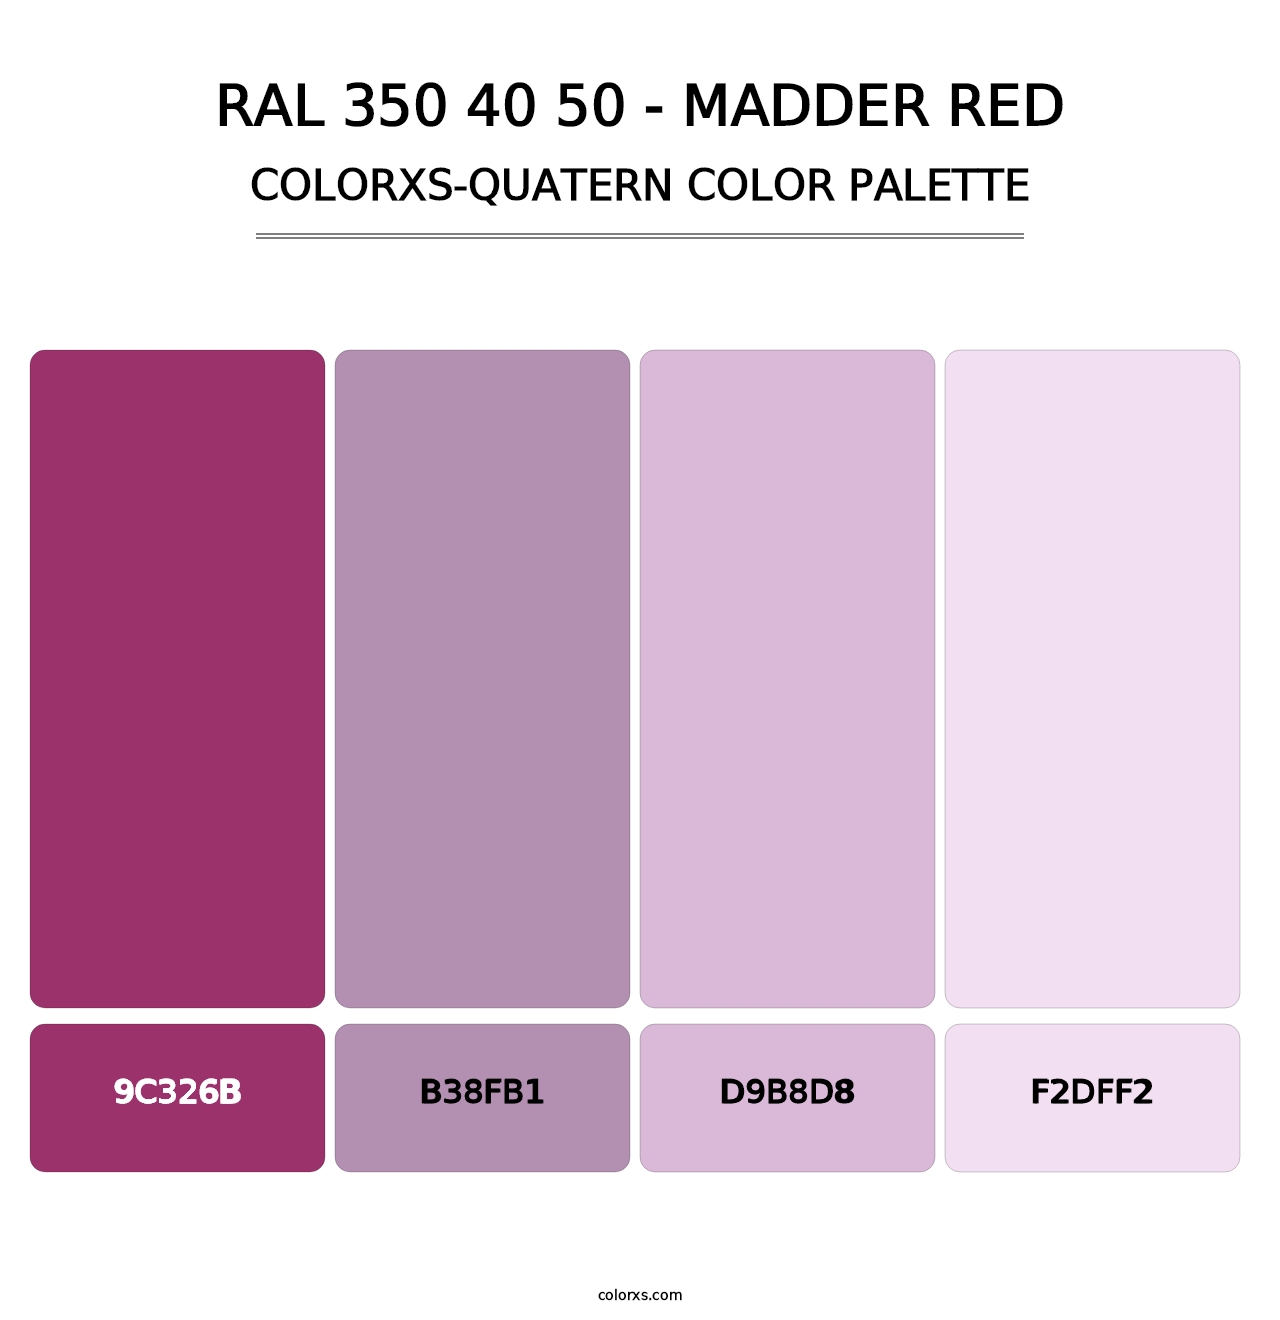 RAL 350 40 50 - Madder Red - Colorxs Quatern Palette